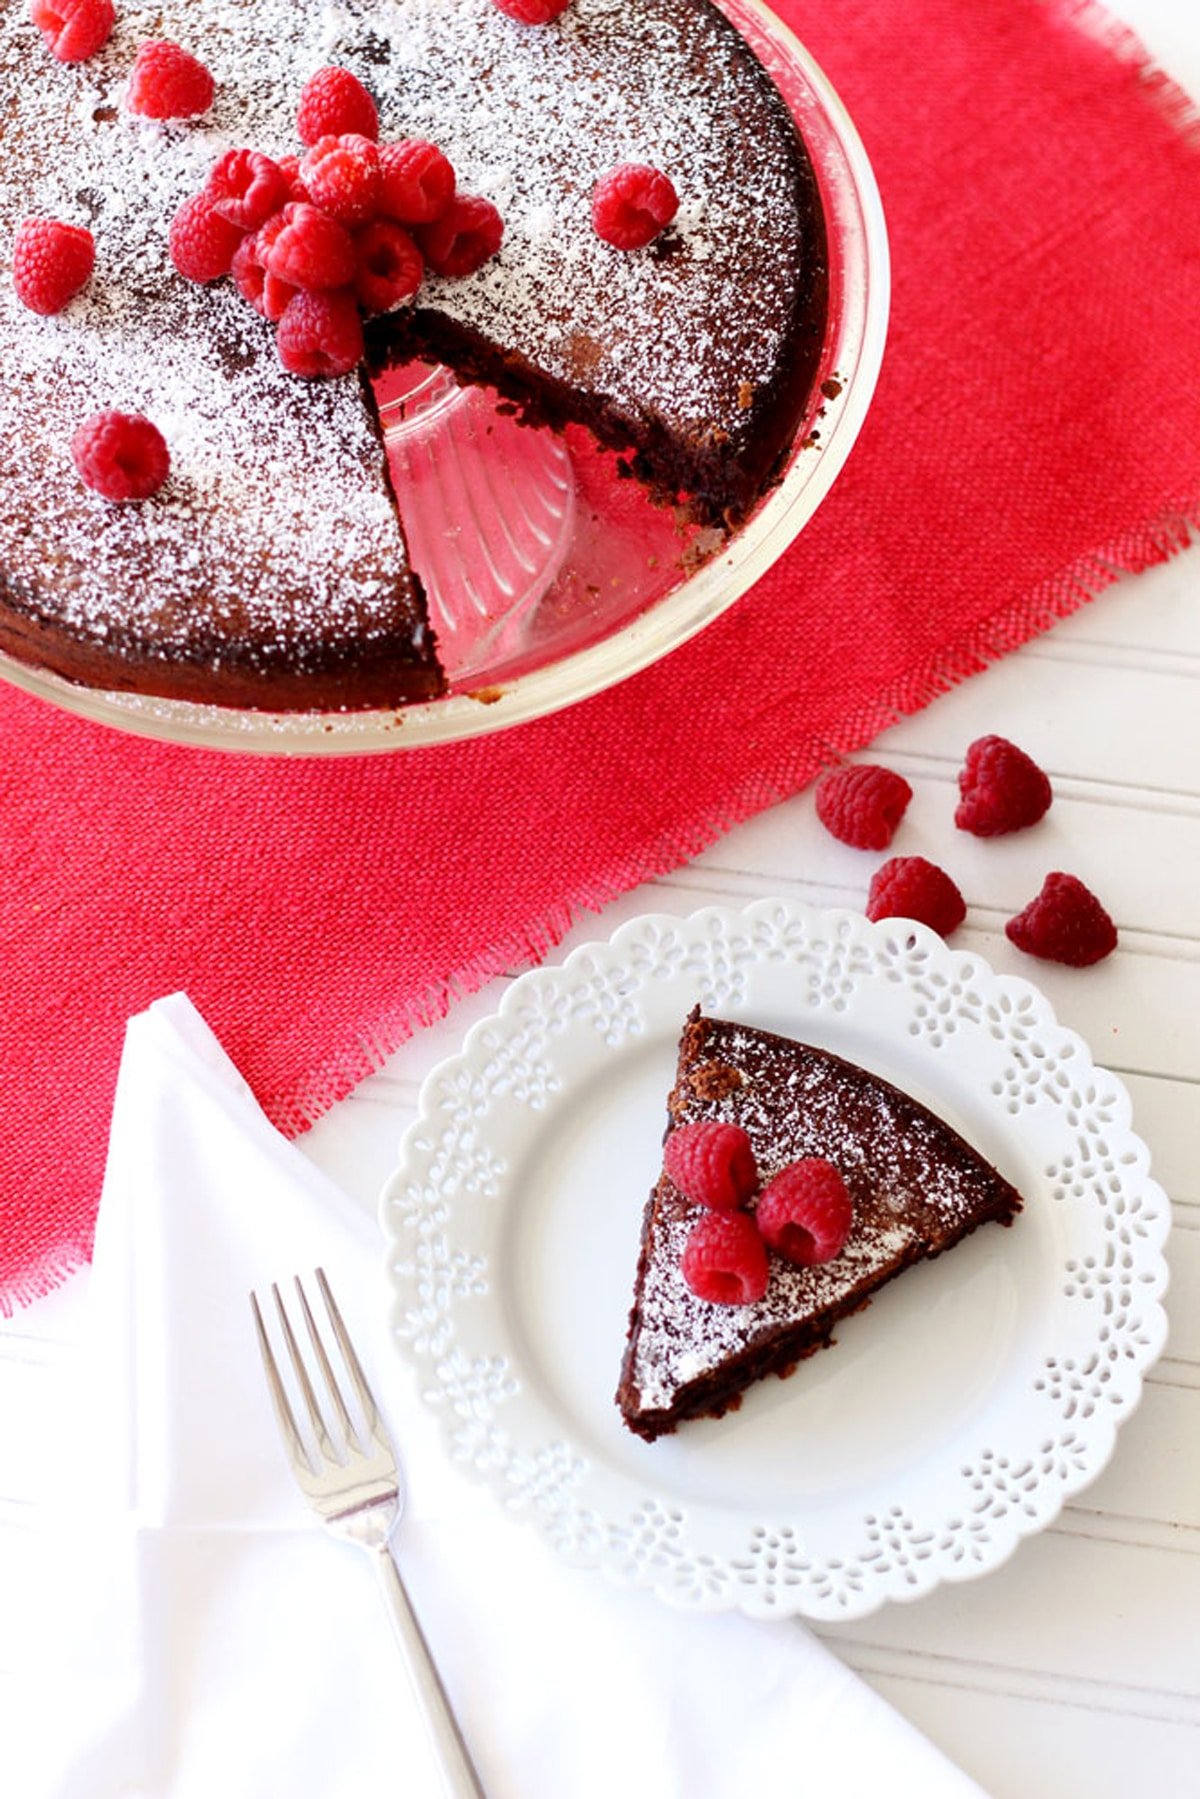 A slice of Flourless Chocolate Torte topped with powdered sugar and raspberries sitting on a plate, fork and remaining cake sitting on a white table with red napkin.